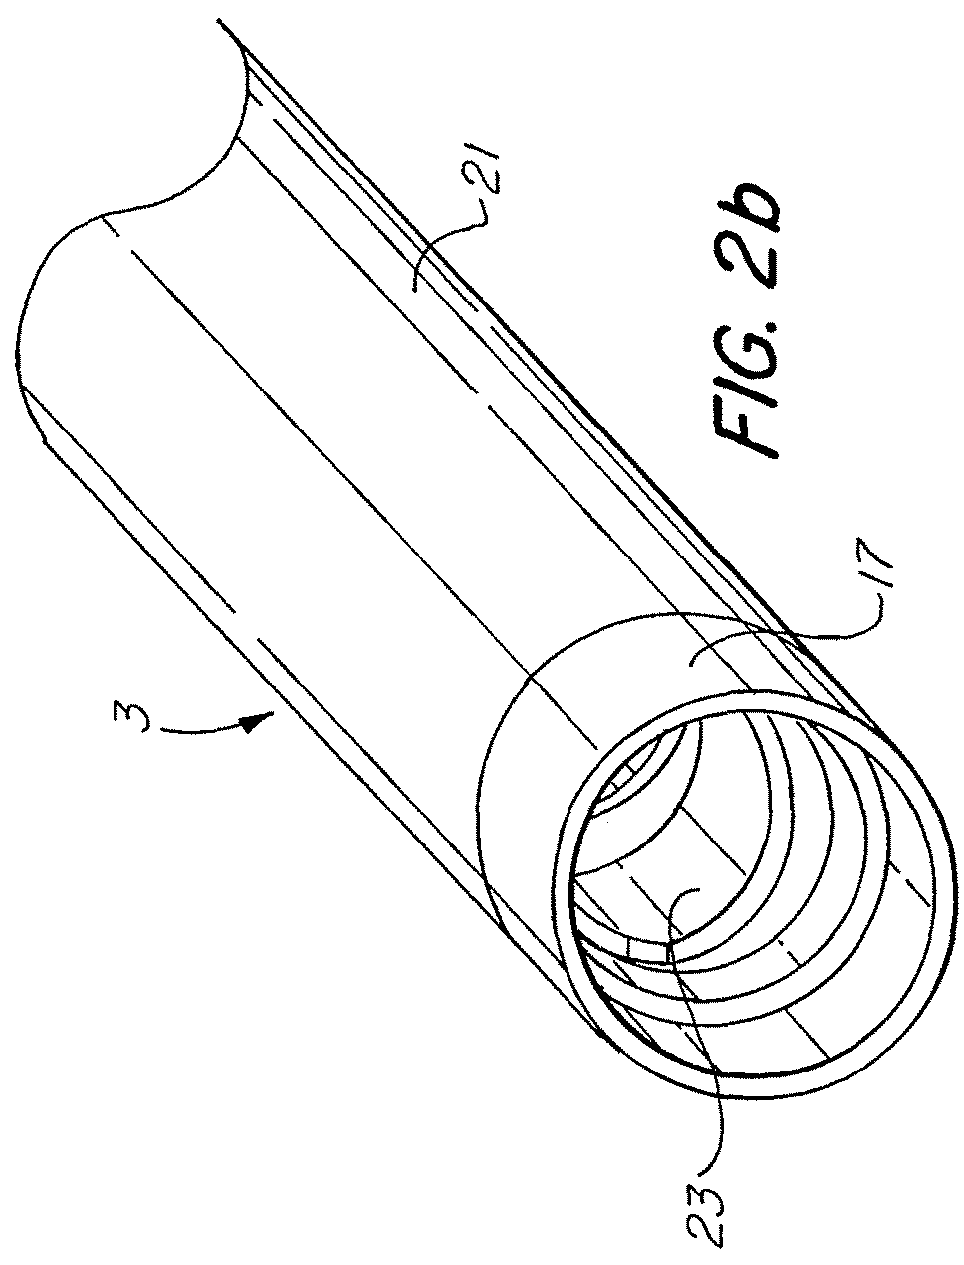 Endoscopic instrument, and shaft for an endoscopic instrument